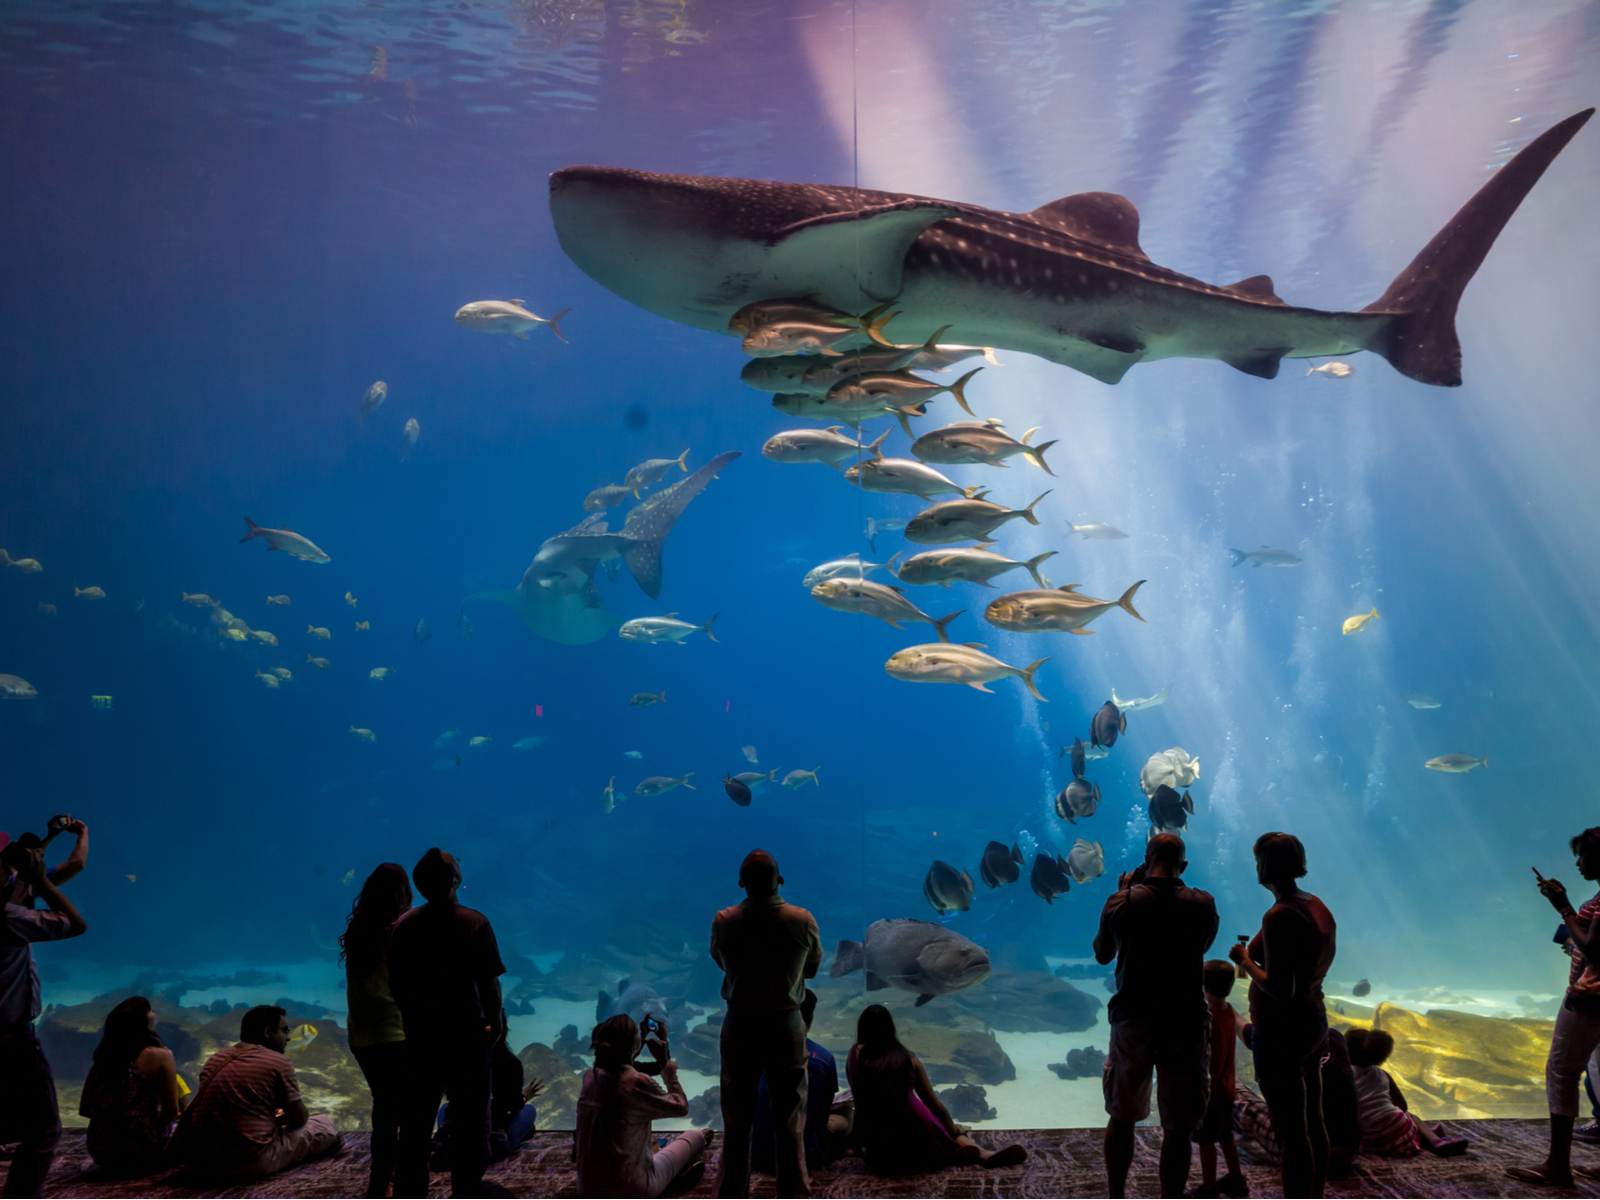 Visitors at Georgia Aquarium, one of the best aquariums in the US, are mesmerized by watching a young Whale Shark and other fishes inside the world's largest aquarium